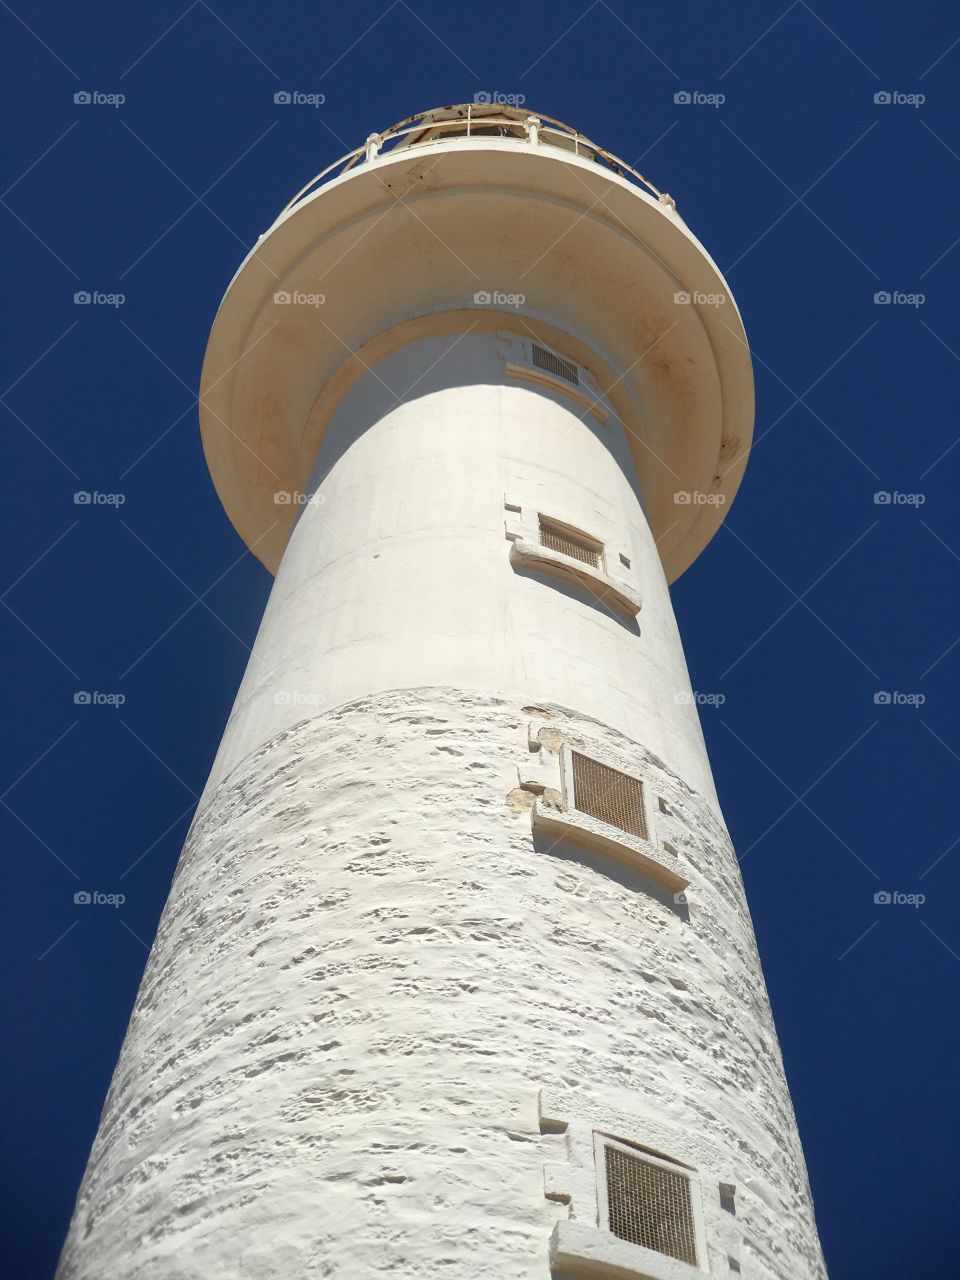 Old white stone lighthouse shot from ground up against a vivid blue sky